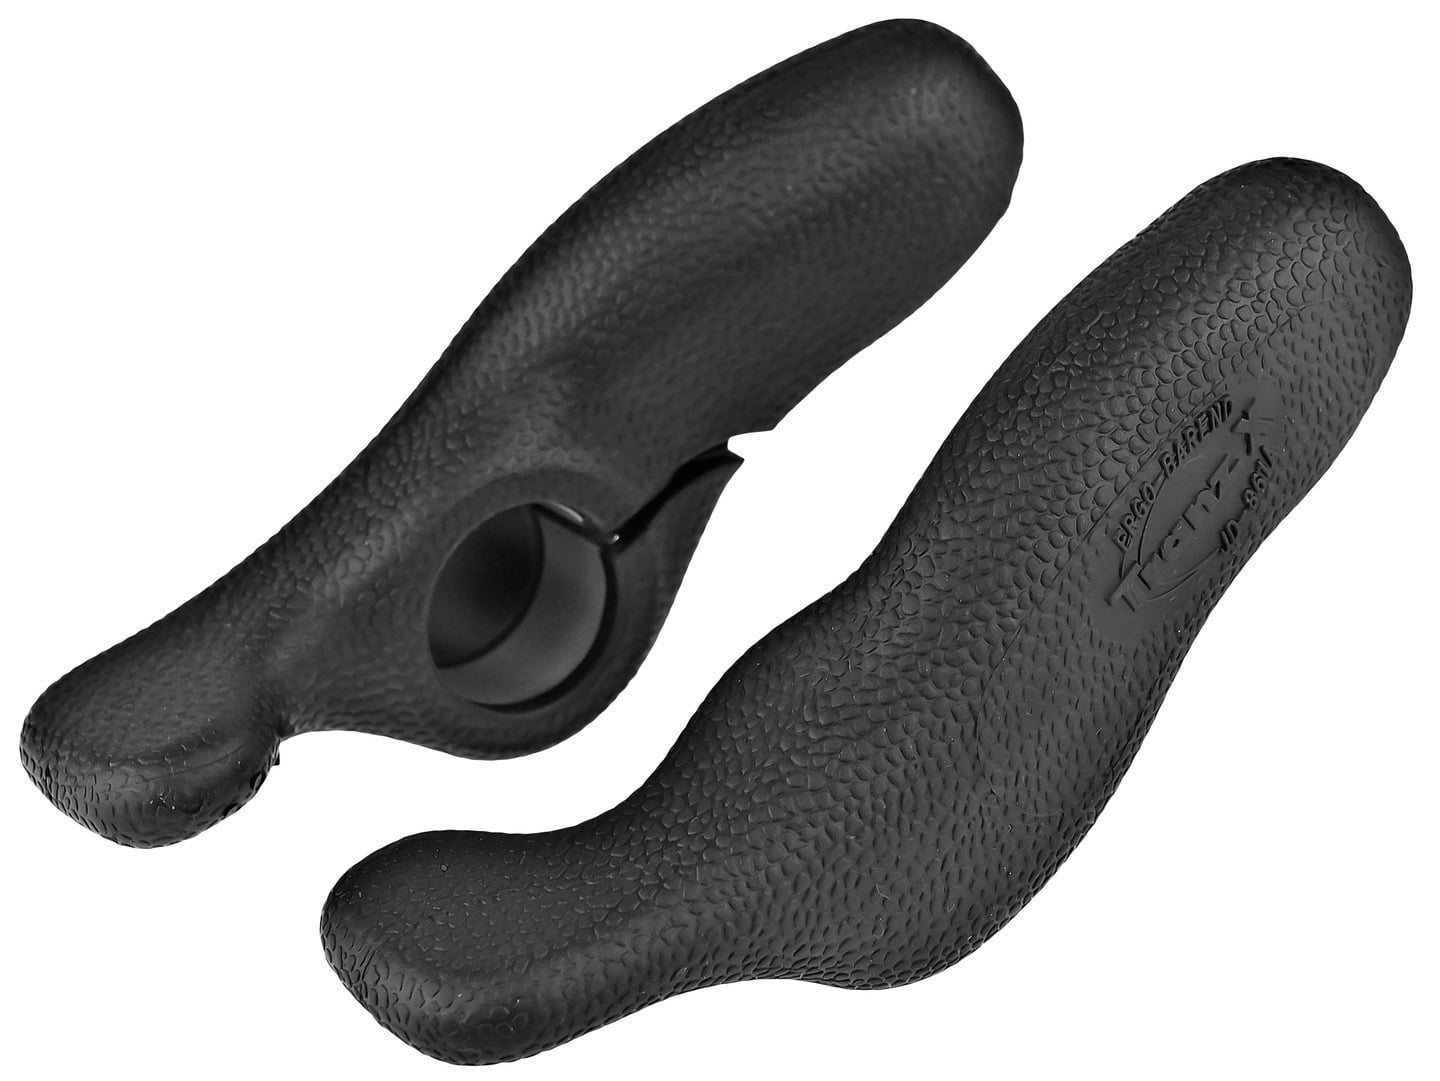 Pair of One23 Kraton Soft Grip Handlebar Bar Ends for sale online